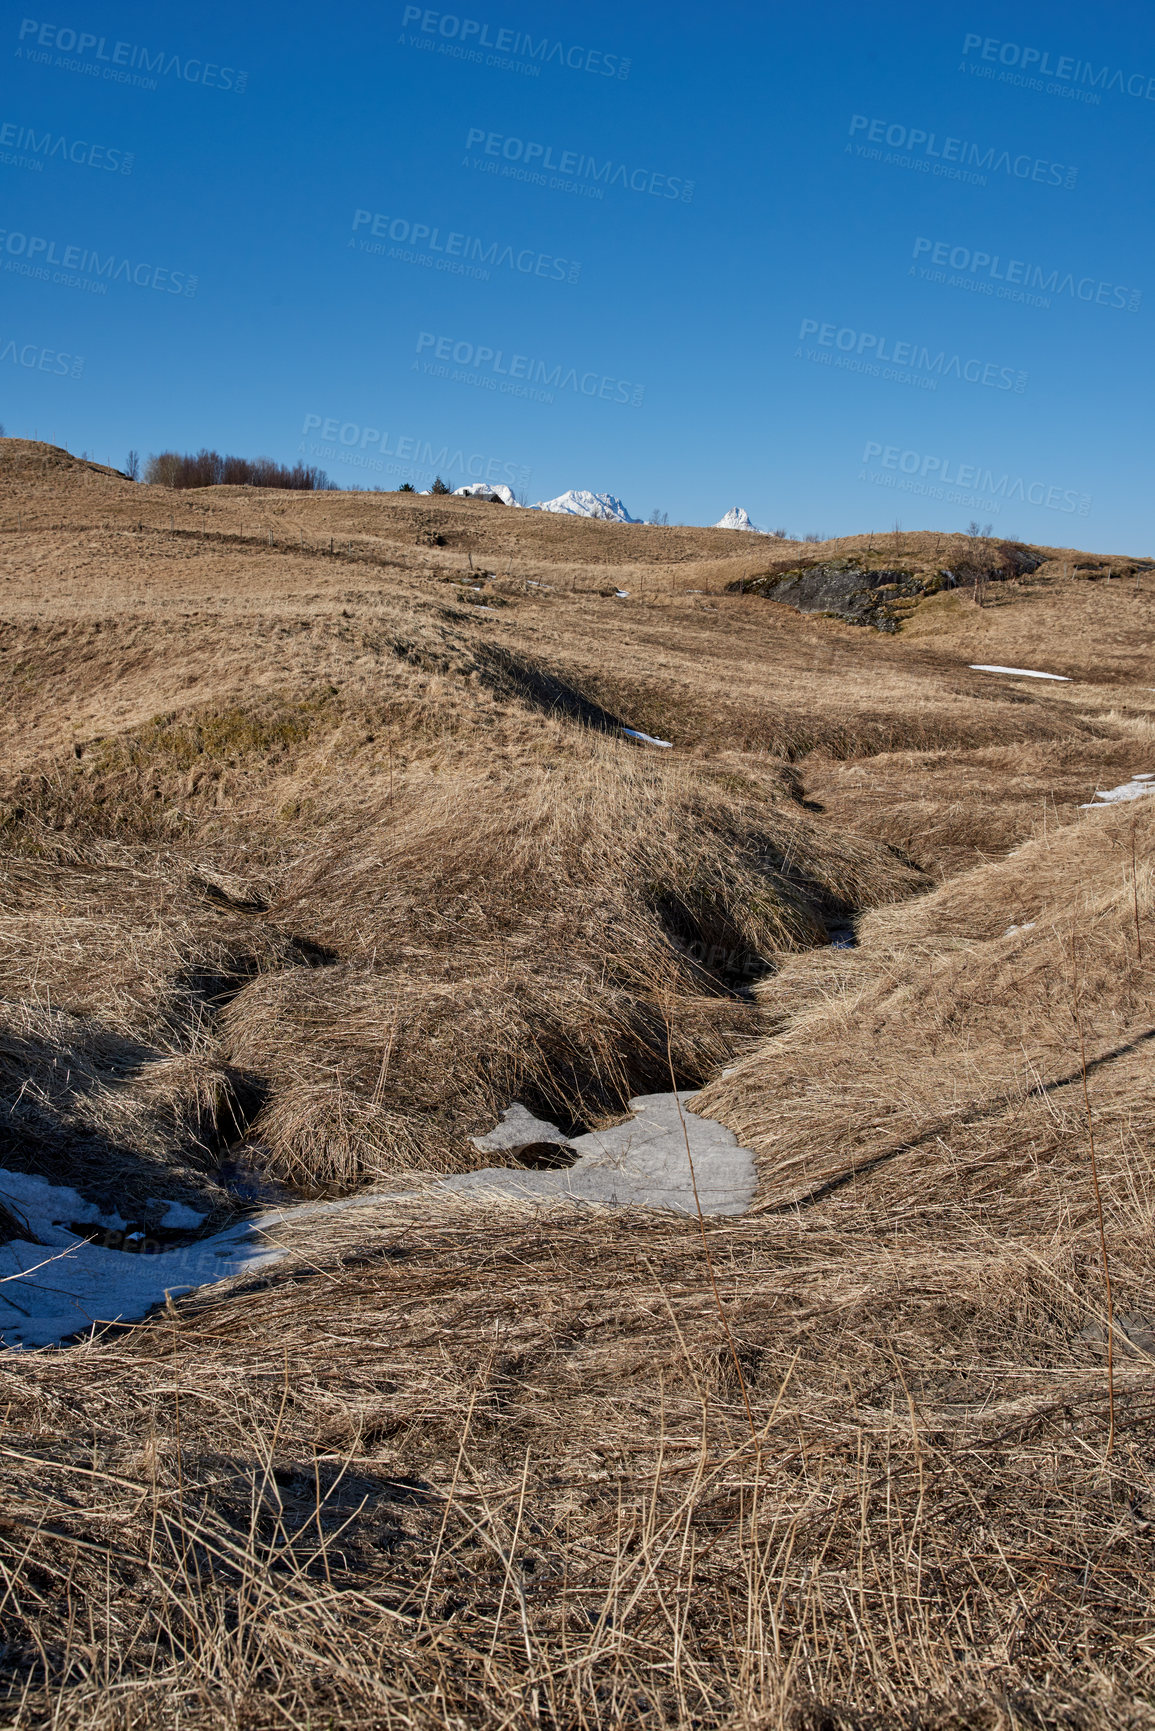 Buy stock photo Dry arid reeds on swamp of empty marshland in Bodo, Norway against a blue sky background with copyspace. Rural and remote landscape with uncultivated ground. Arid and barren shrubs in the wilderness